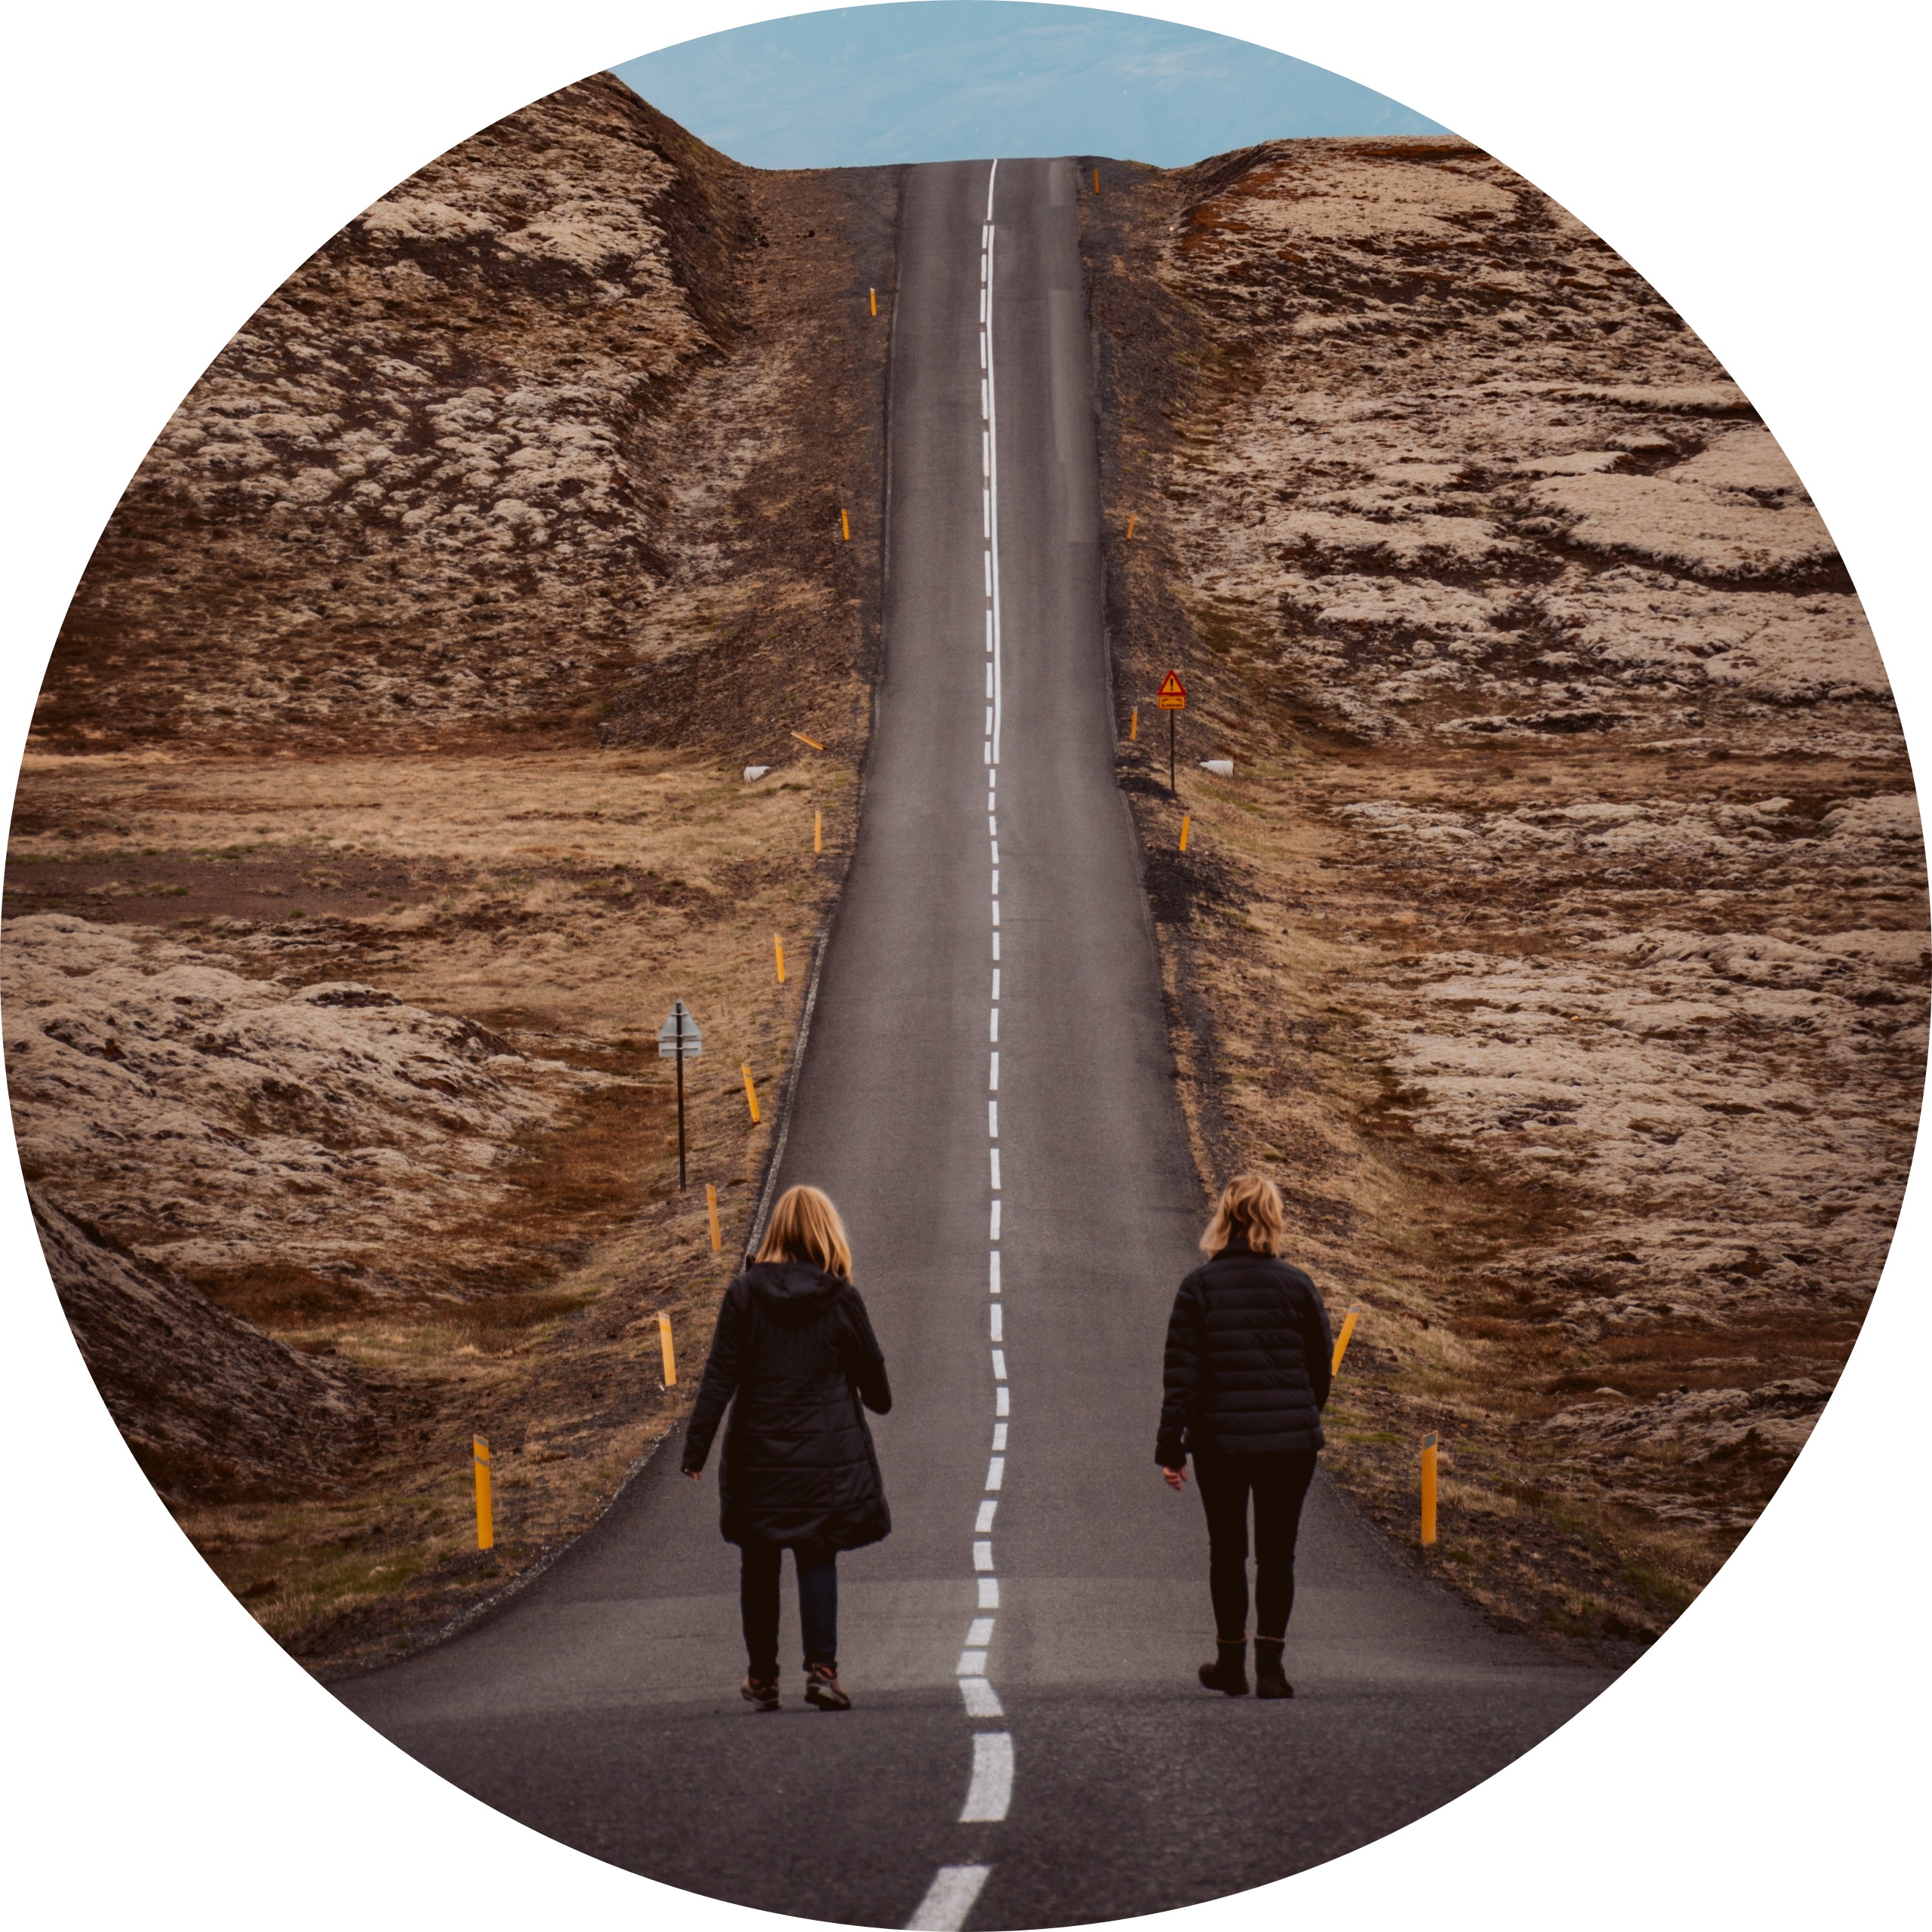 Two people walking a road together